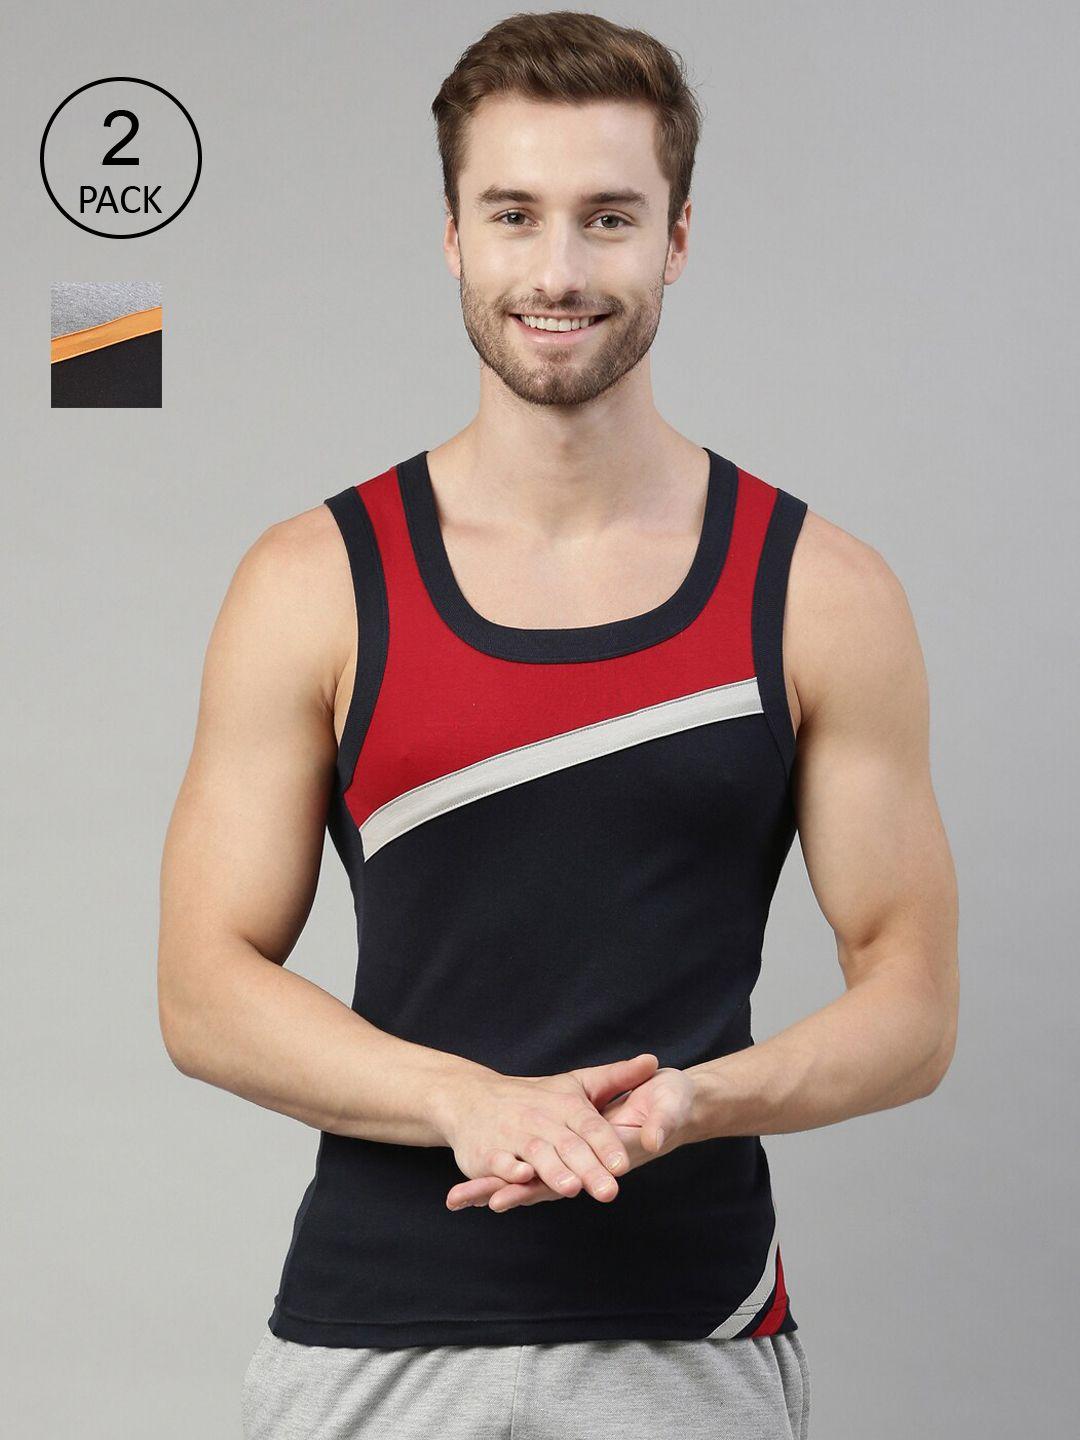 dixcy scott men pack of 2 red & black colourblocked pure cotton innerwear vests